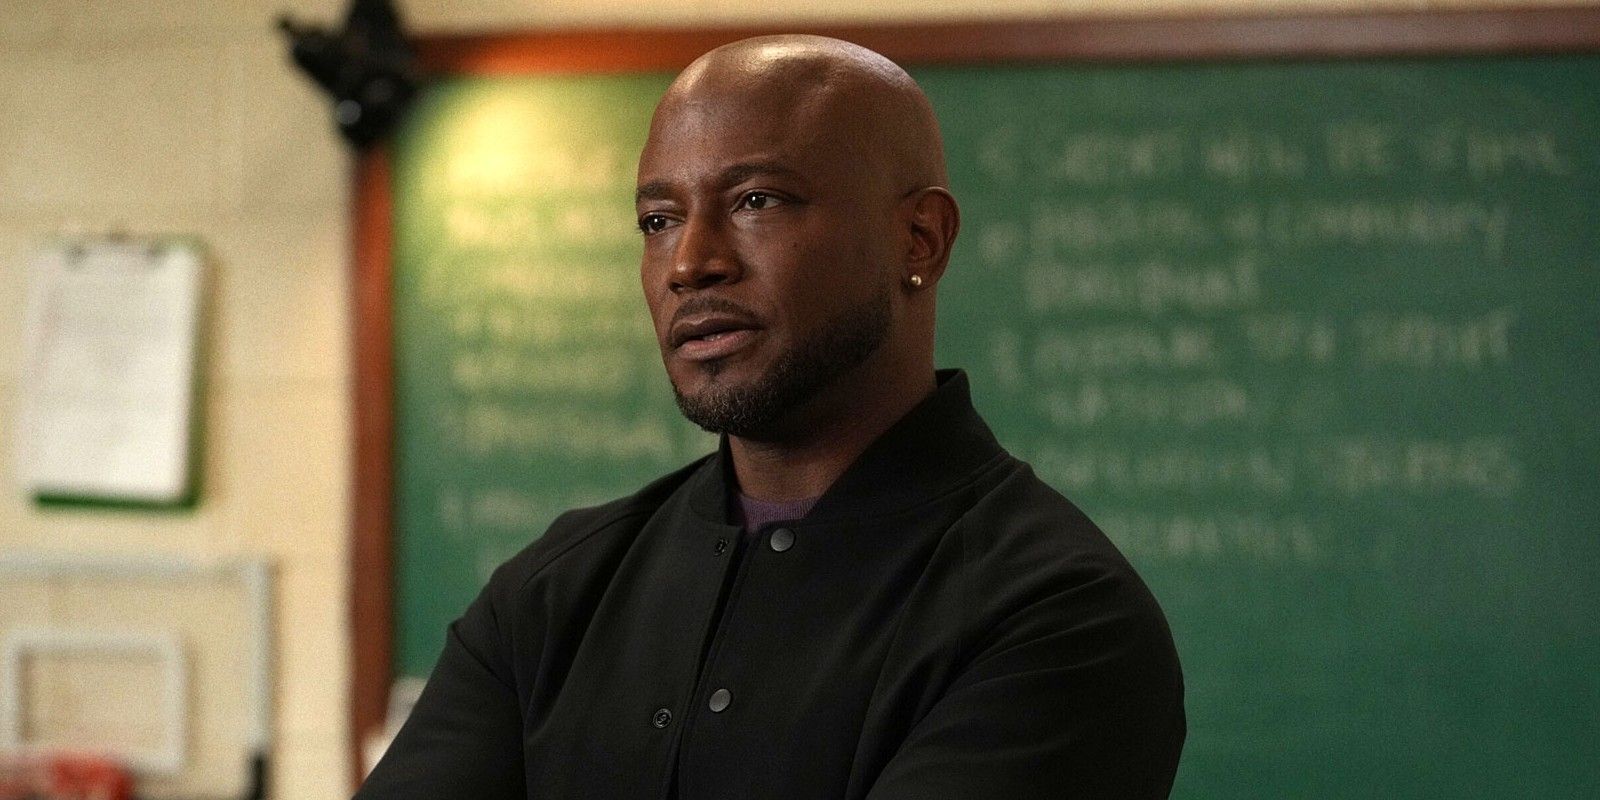 All American Season 5 Taye Diggs as Billy Baker in a Classroom